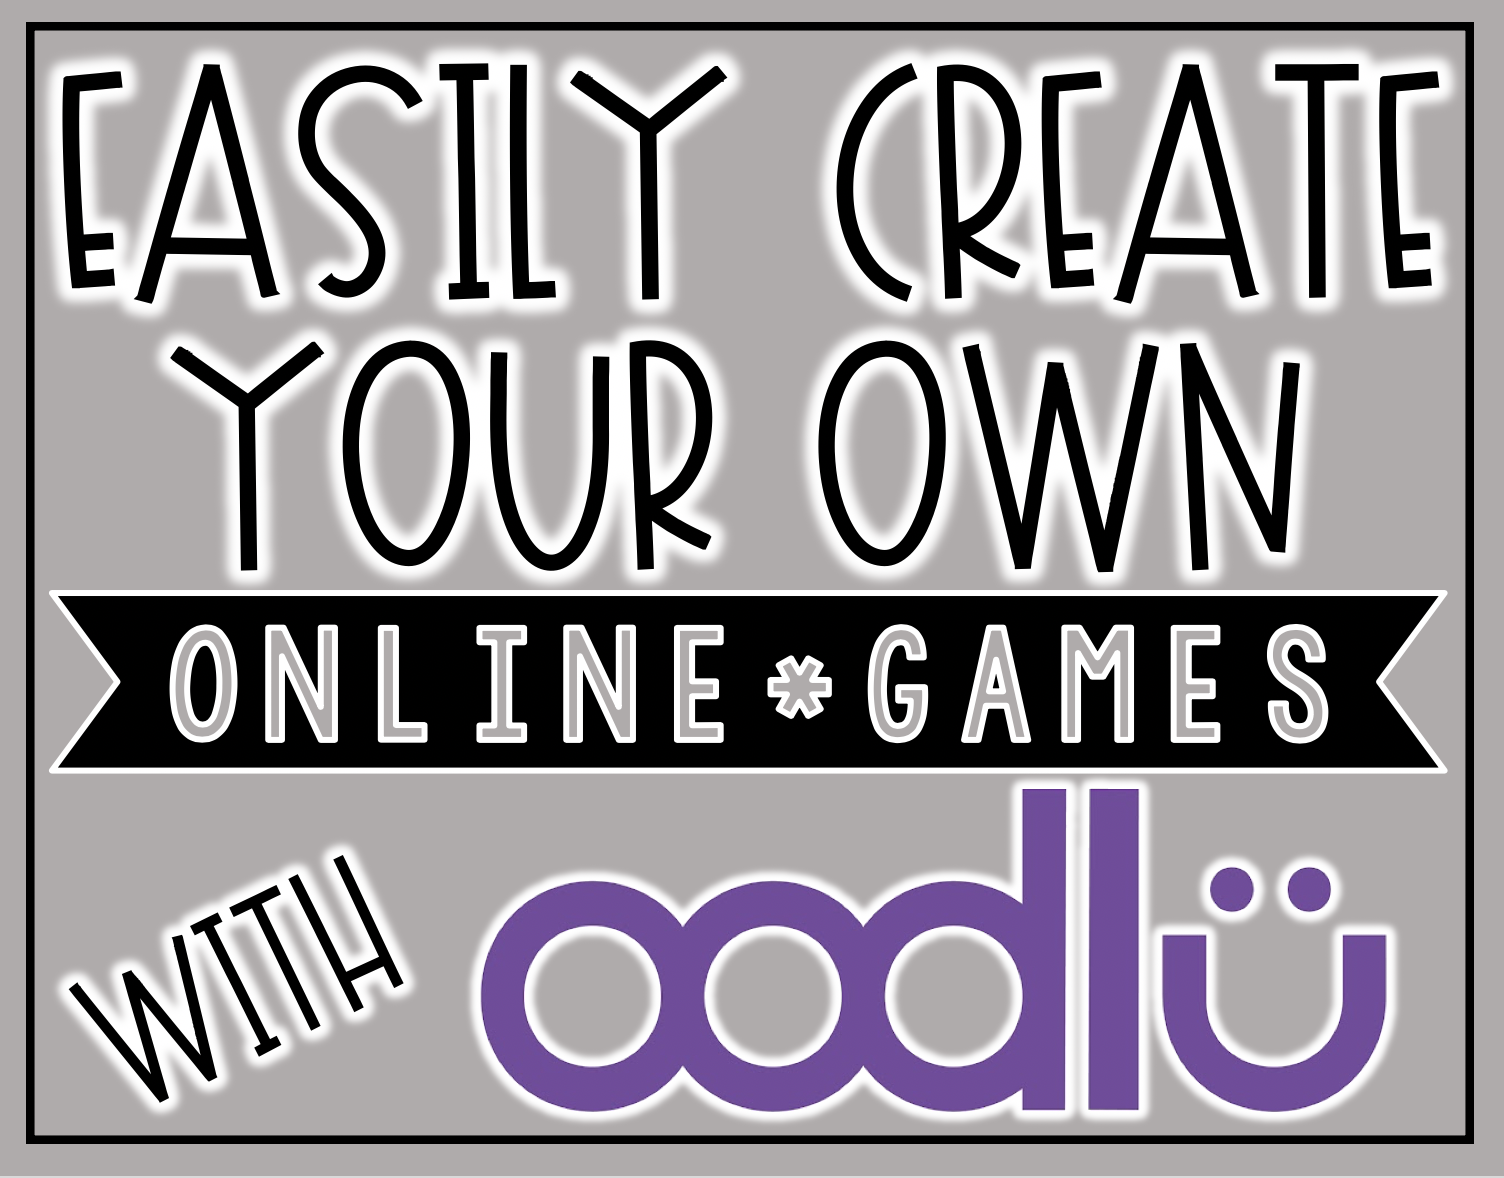 Easily Create Your Own Online Games with Oodlu